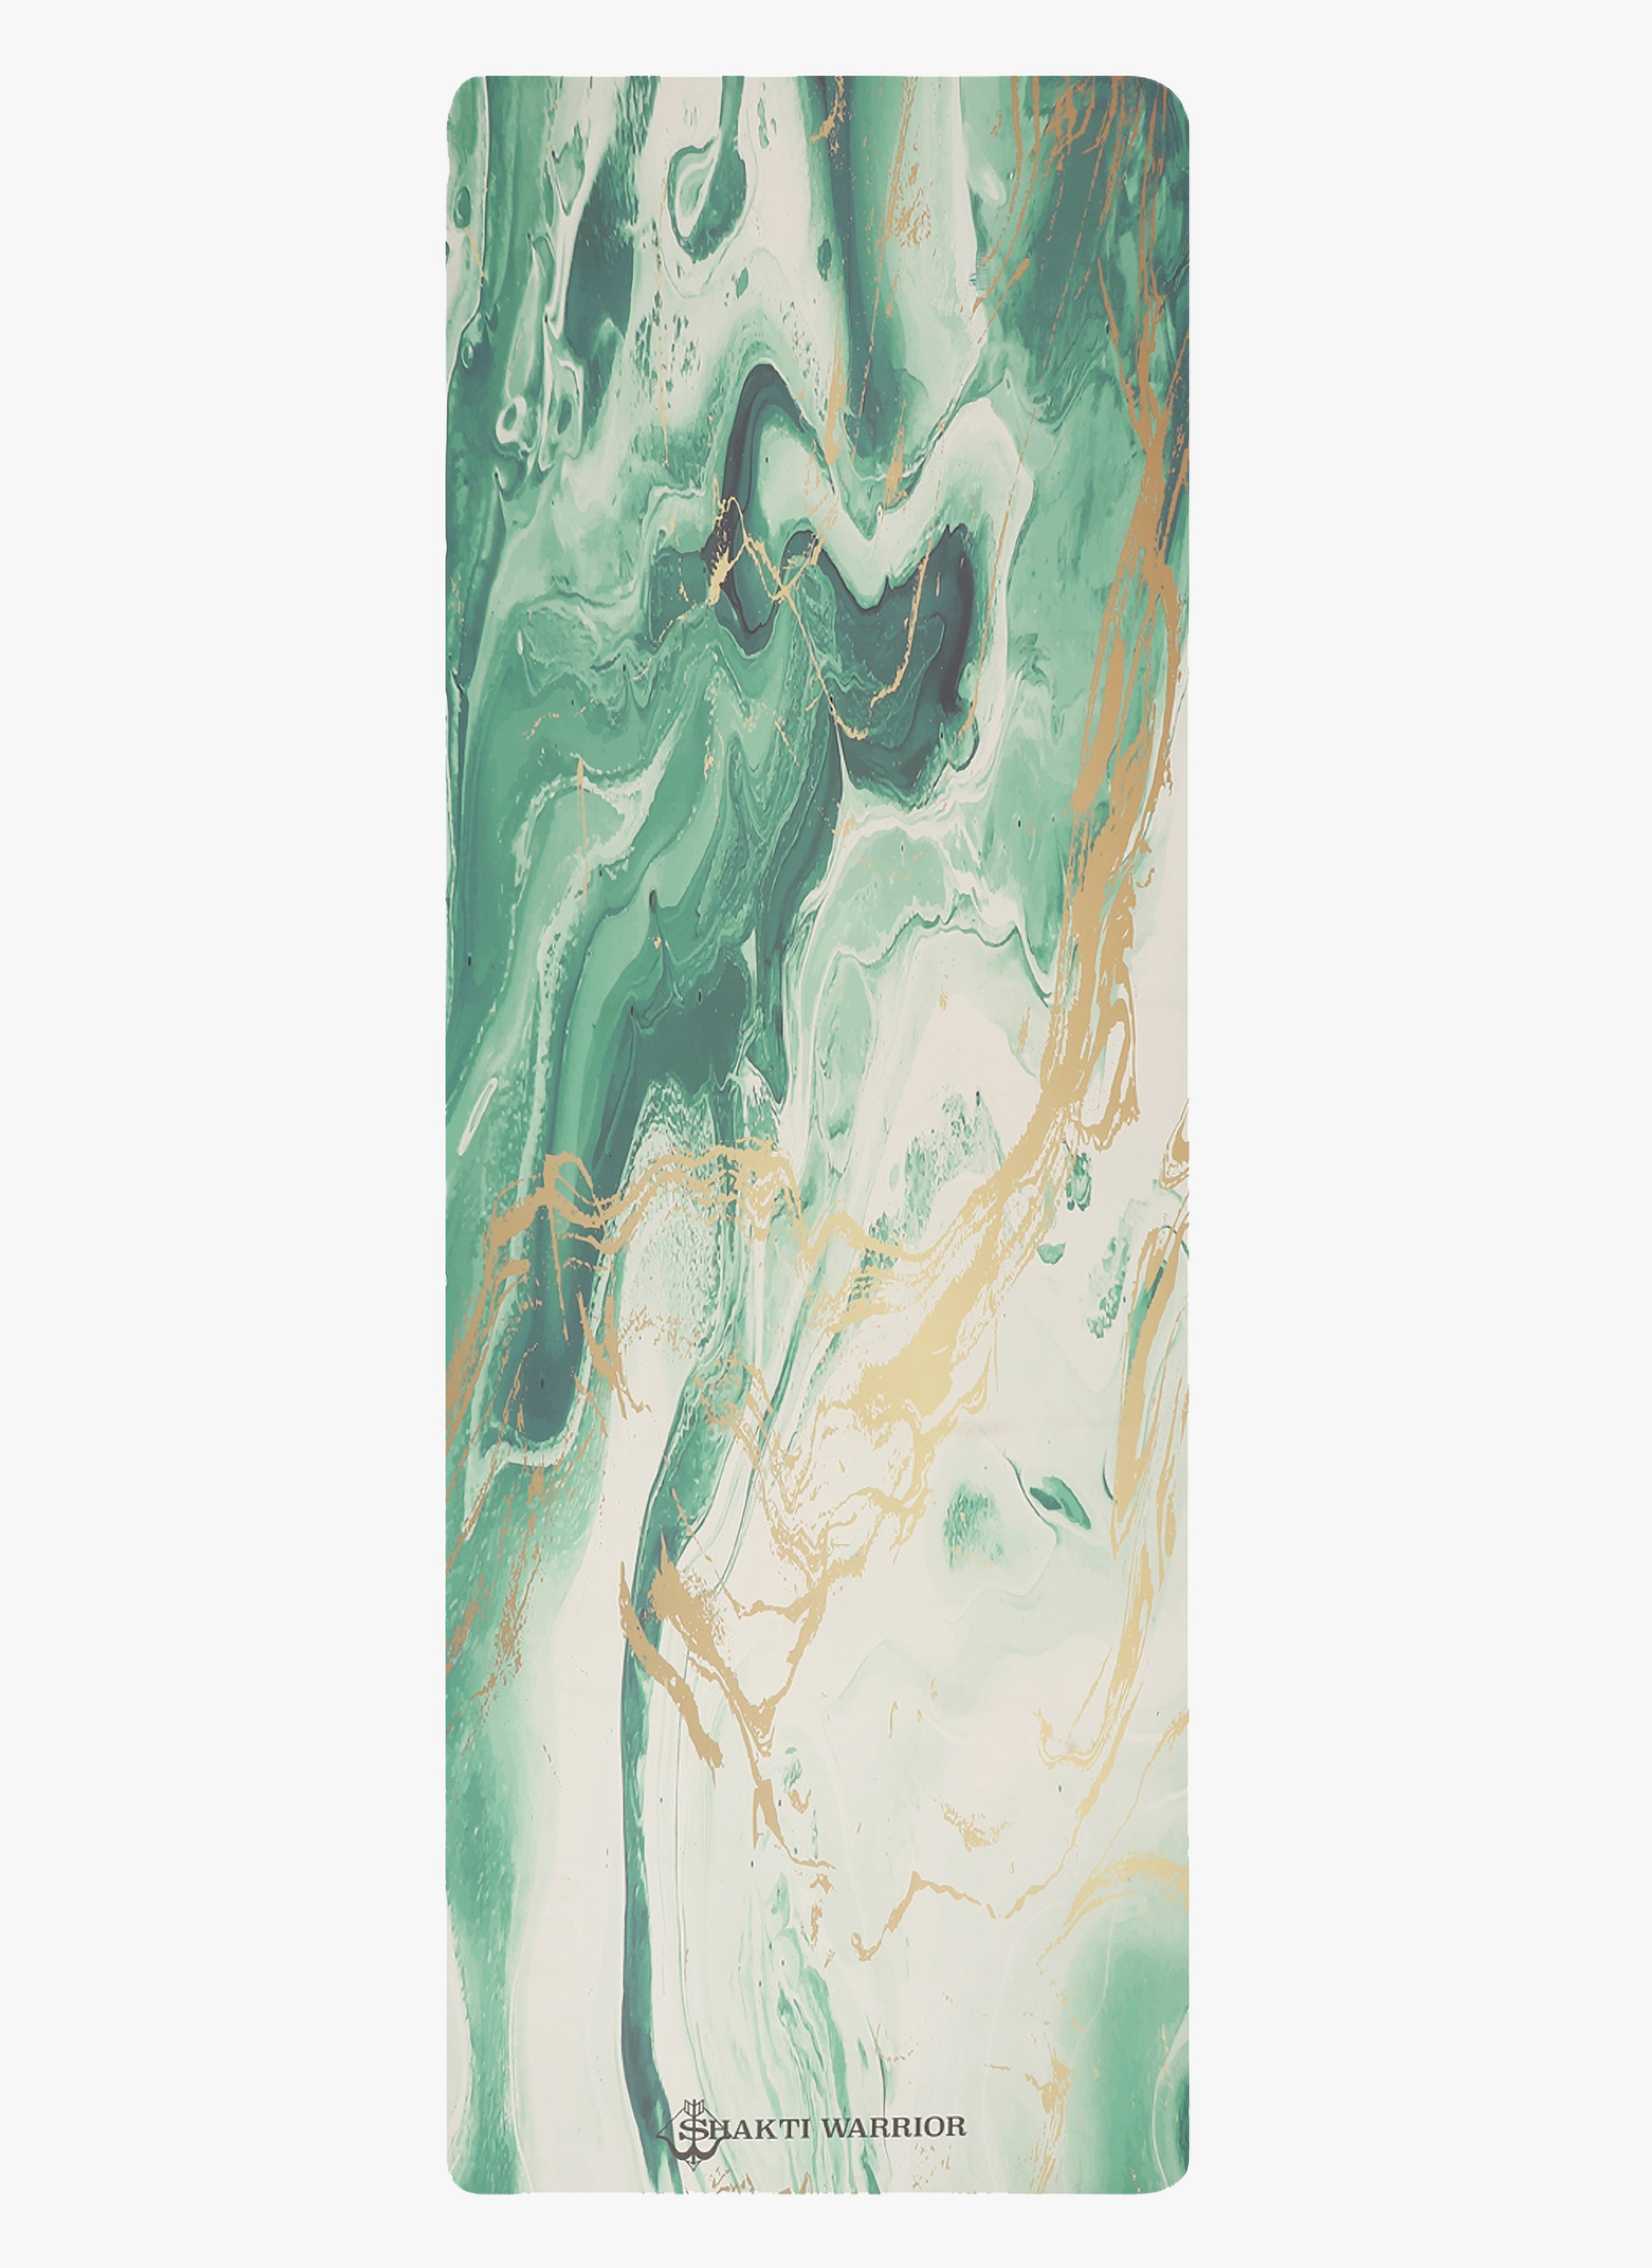 Shakti Warrior Anahata Recycled PU Yoga Mat - Luxe matte finish, wider design for spacious flows. Recycled PU top, natural tree rubber bottom, high density for joint cushioning. Eco-friendly, durable, anti-odor, and perfect for regular and hot yoga.